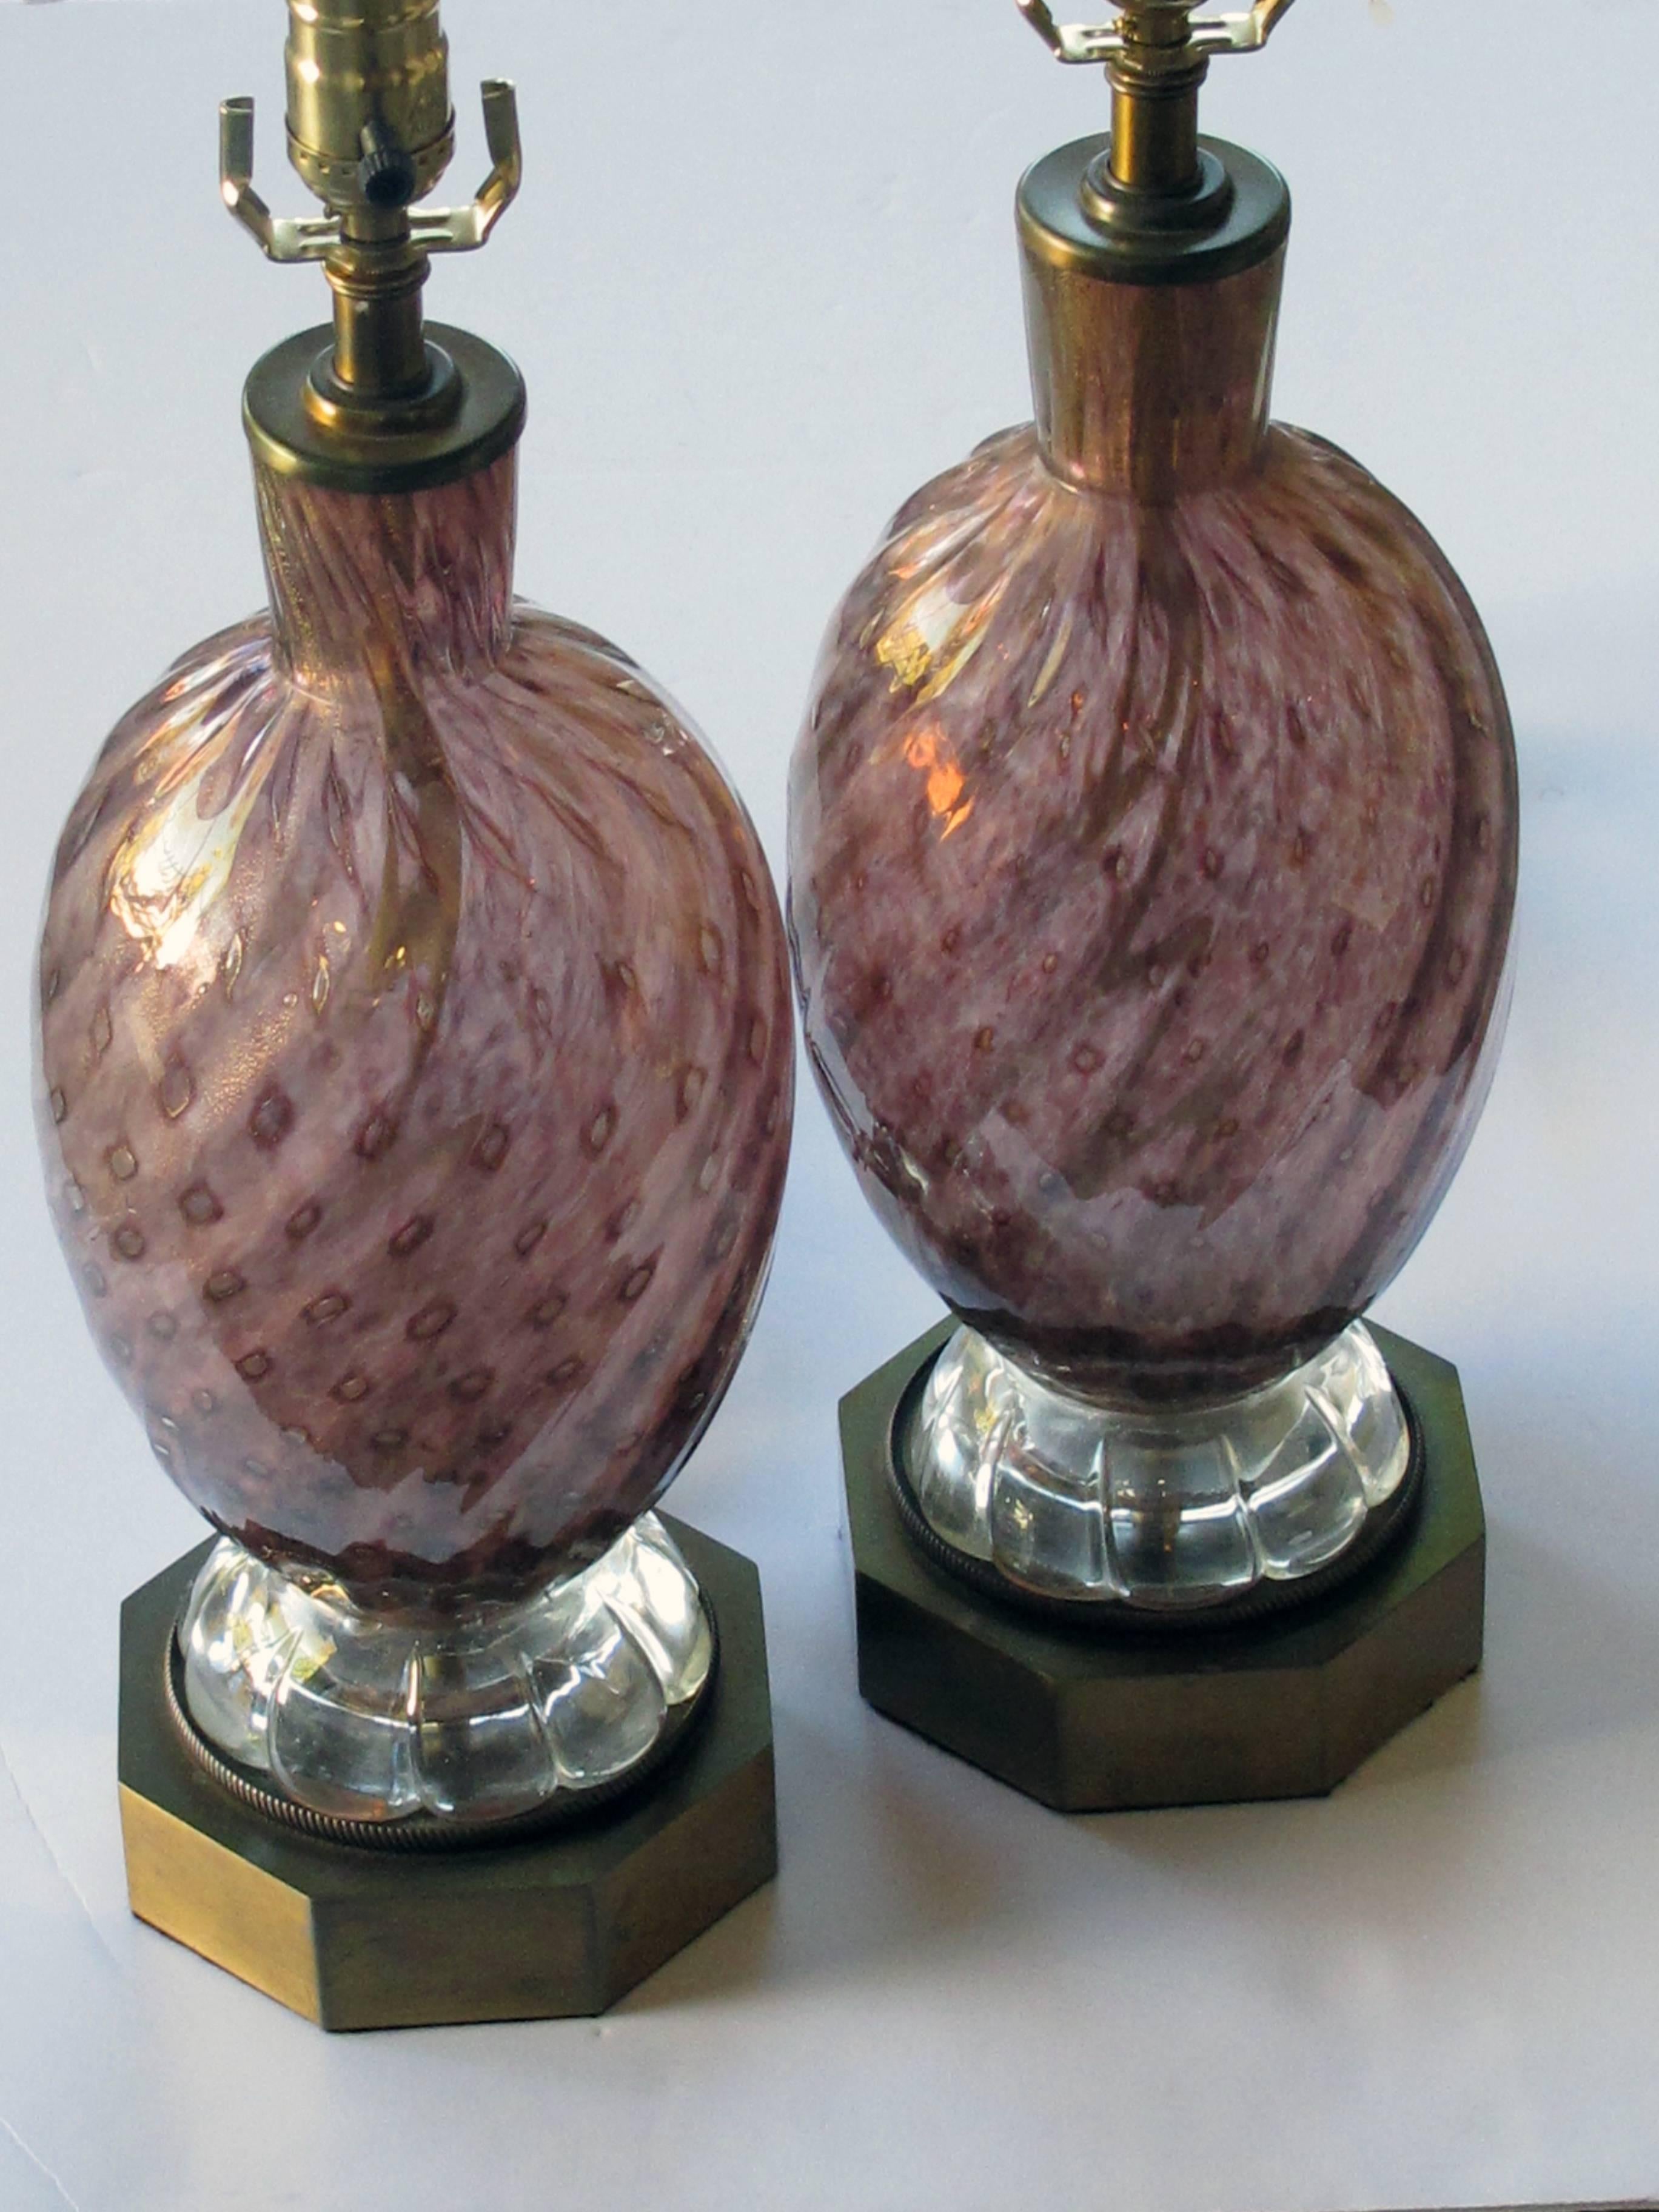 Each striking lamp of deep purple bullicante and gold aventurine glass with an iridescent surface; raised on a brass octagonal base.